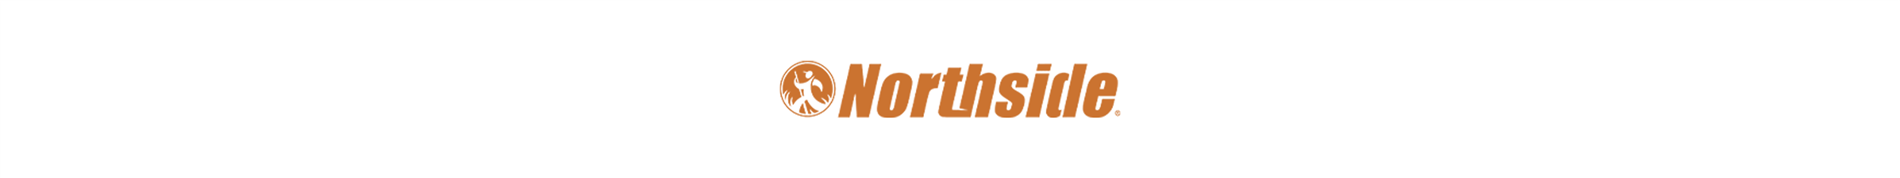 Northside Snow Boots and More for the Whole Family